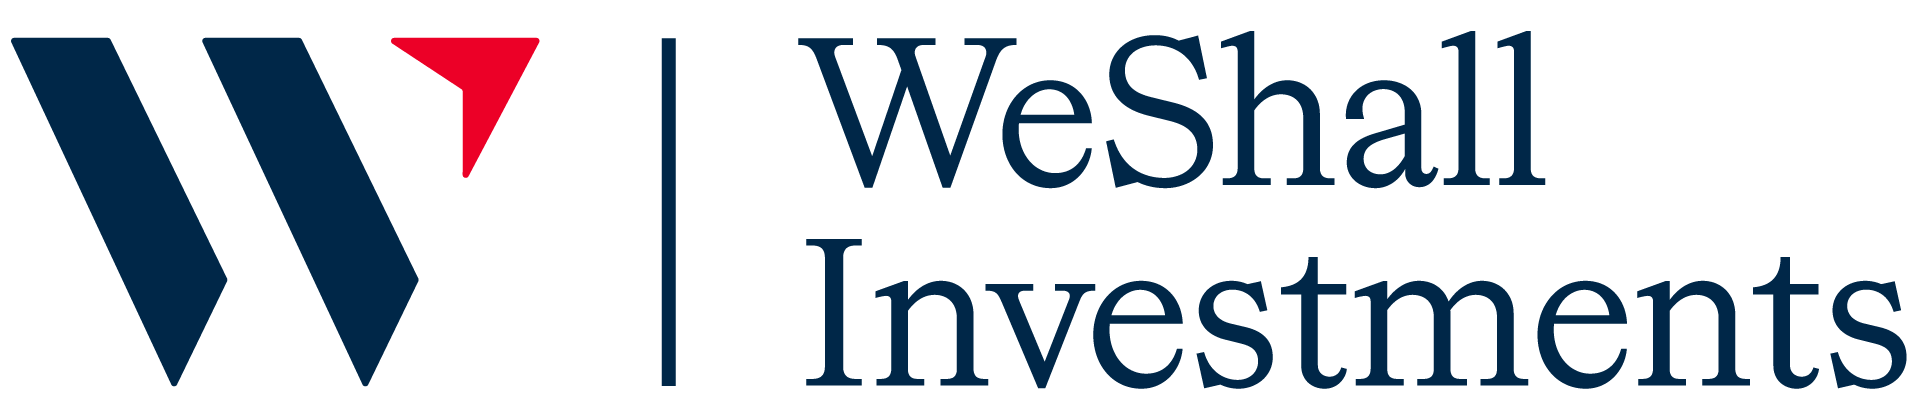 WeShall Investment Logo in indigo and red